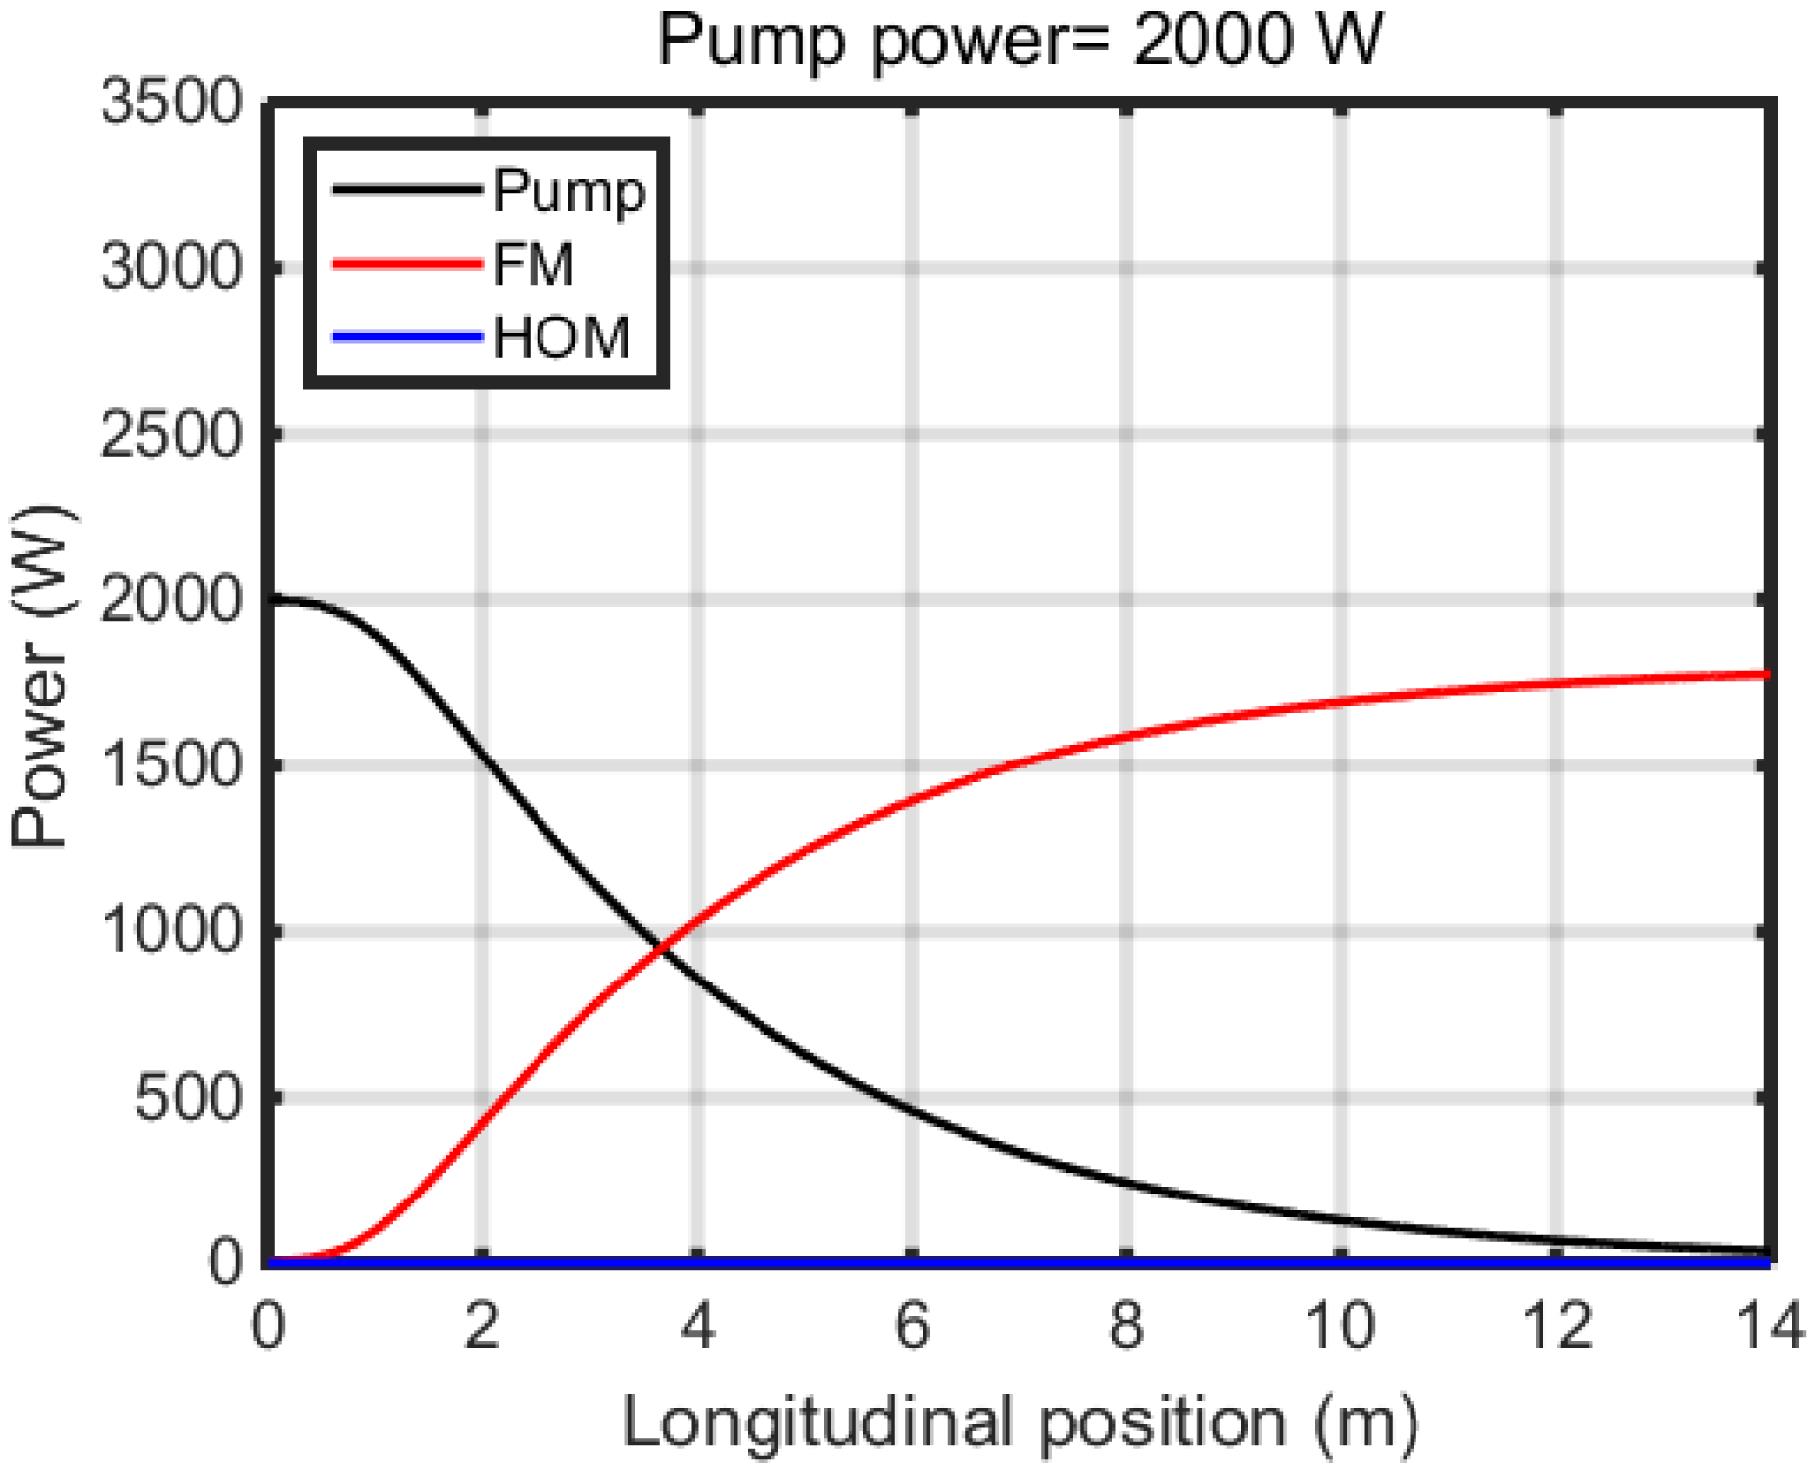 Power distribution in the co-pumped amplifier in the first stage.